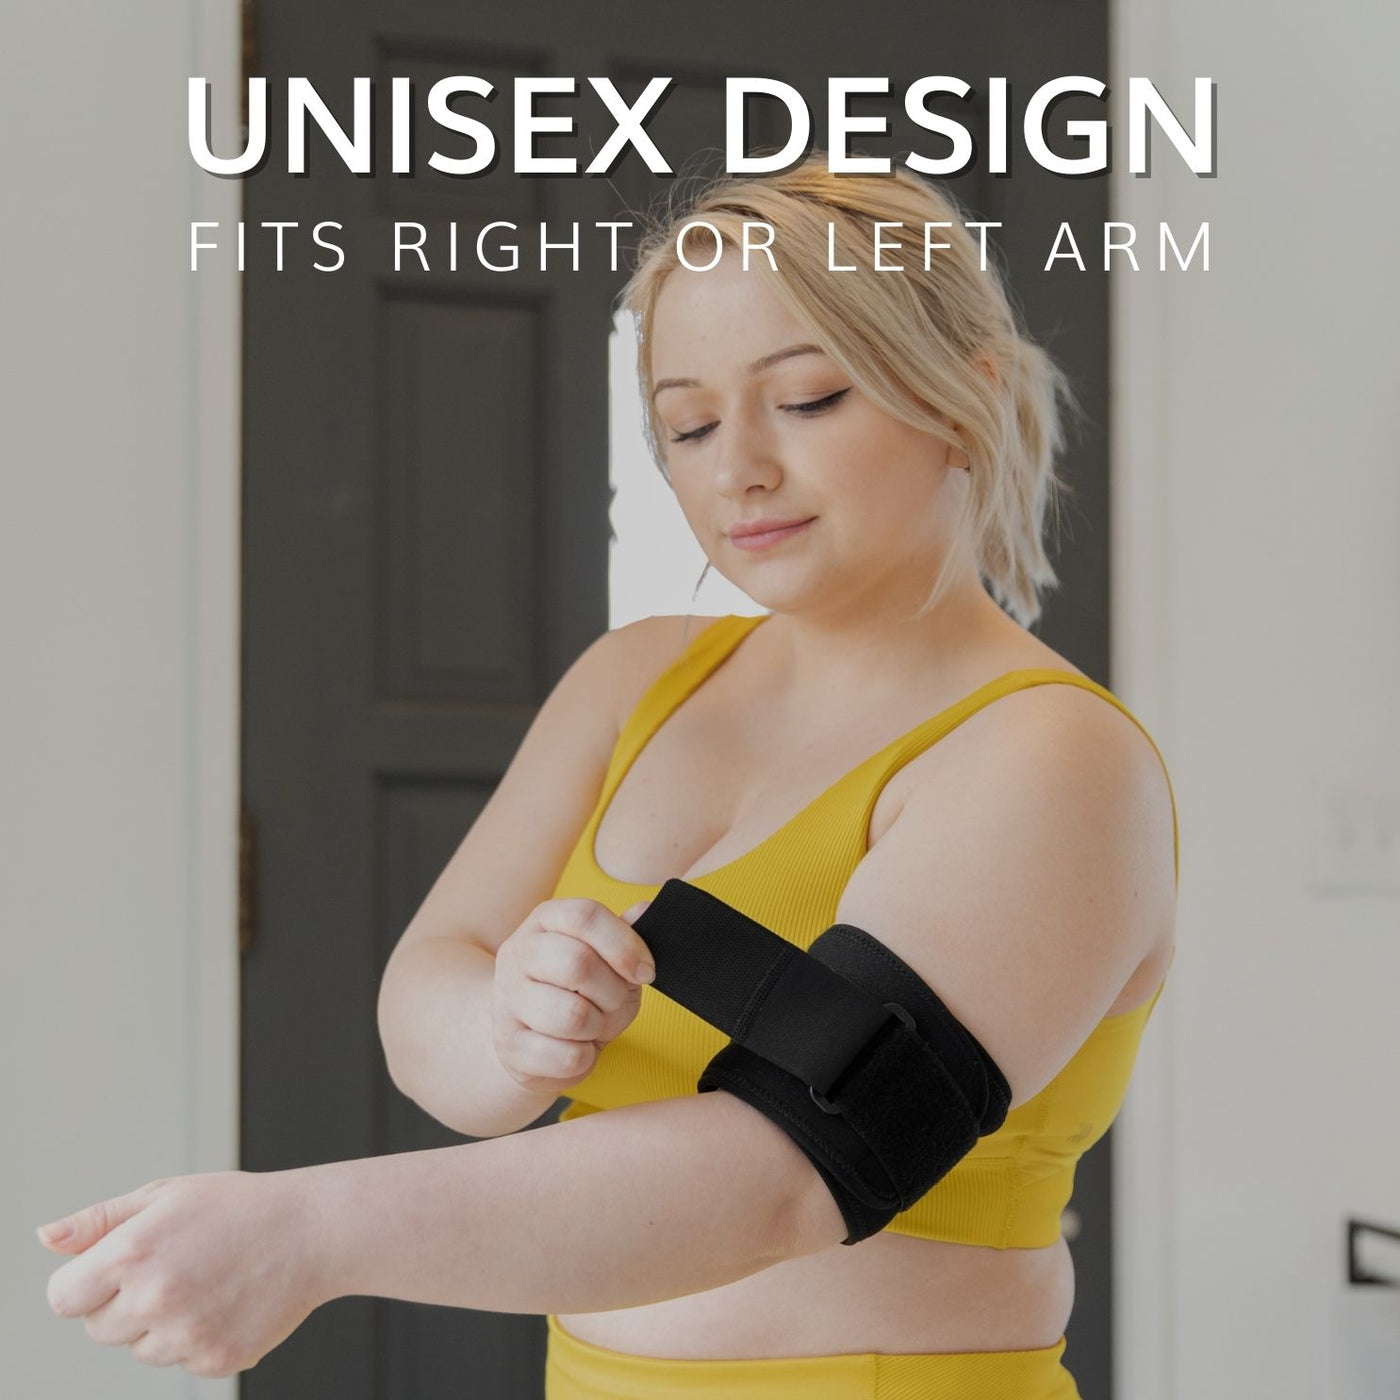 Our upper arm brace is unisex and can be worn on your right or left arm over the bicep